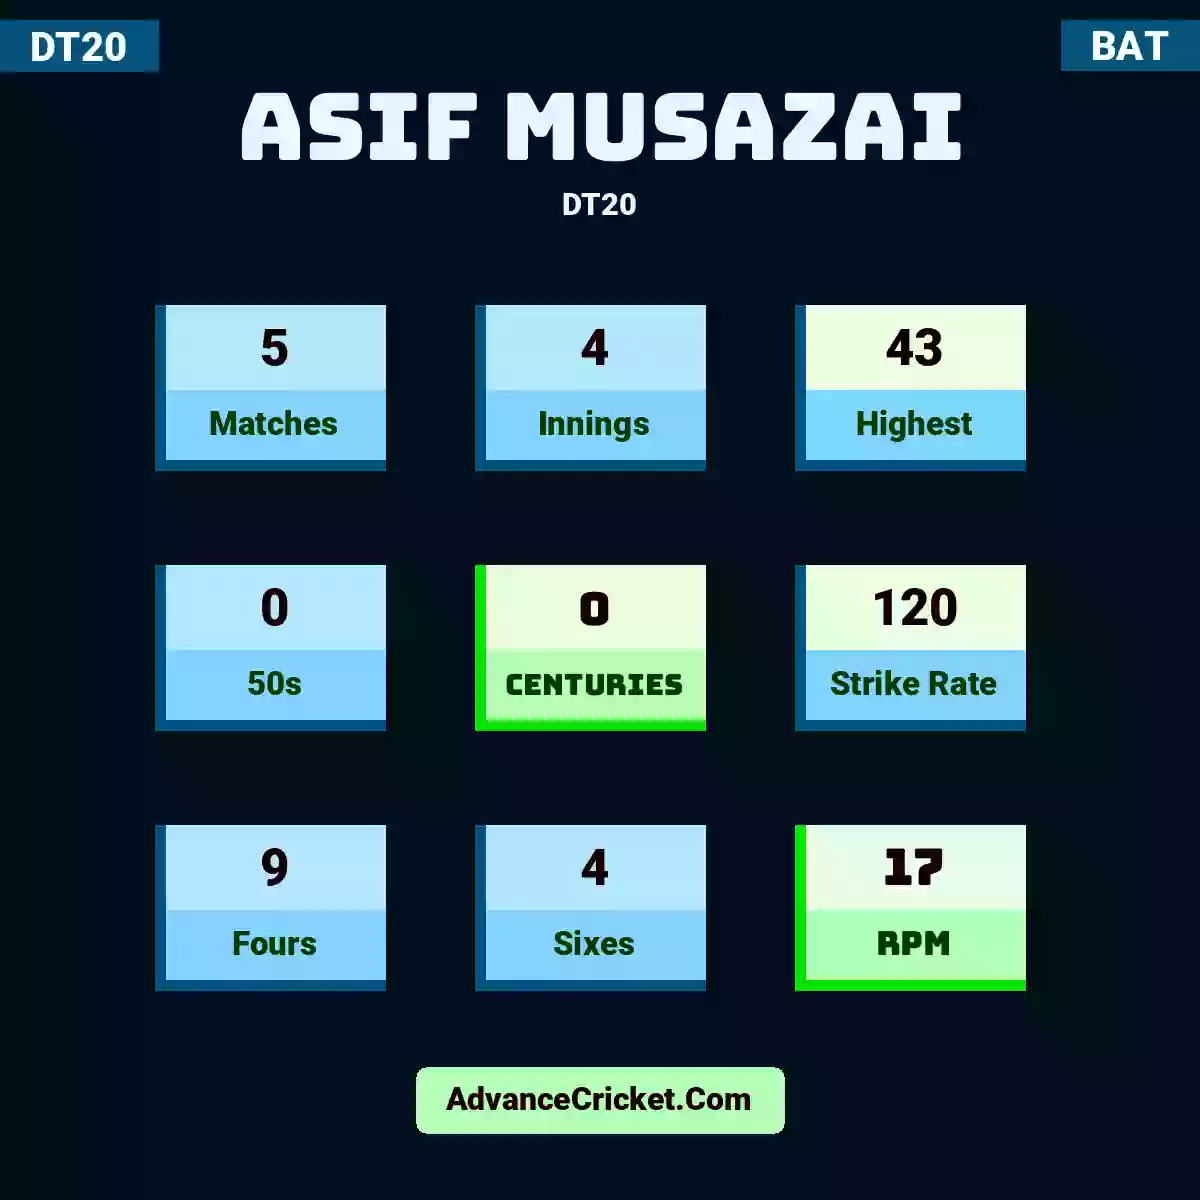 Asif Musazai DT20 , Asif Musazai played 5 matches, scored 43 runs as highest, 0 half-centuries, and 0 centuries, with a strike rate of 120. A.Musazai hit 9 fours and 4 sixes, with an RPM of 17.